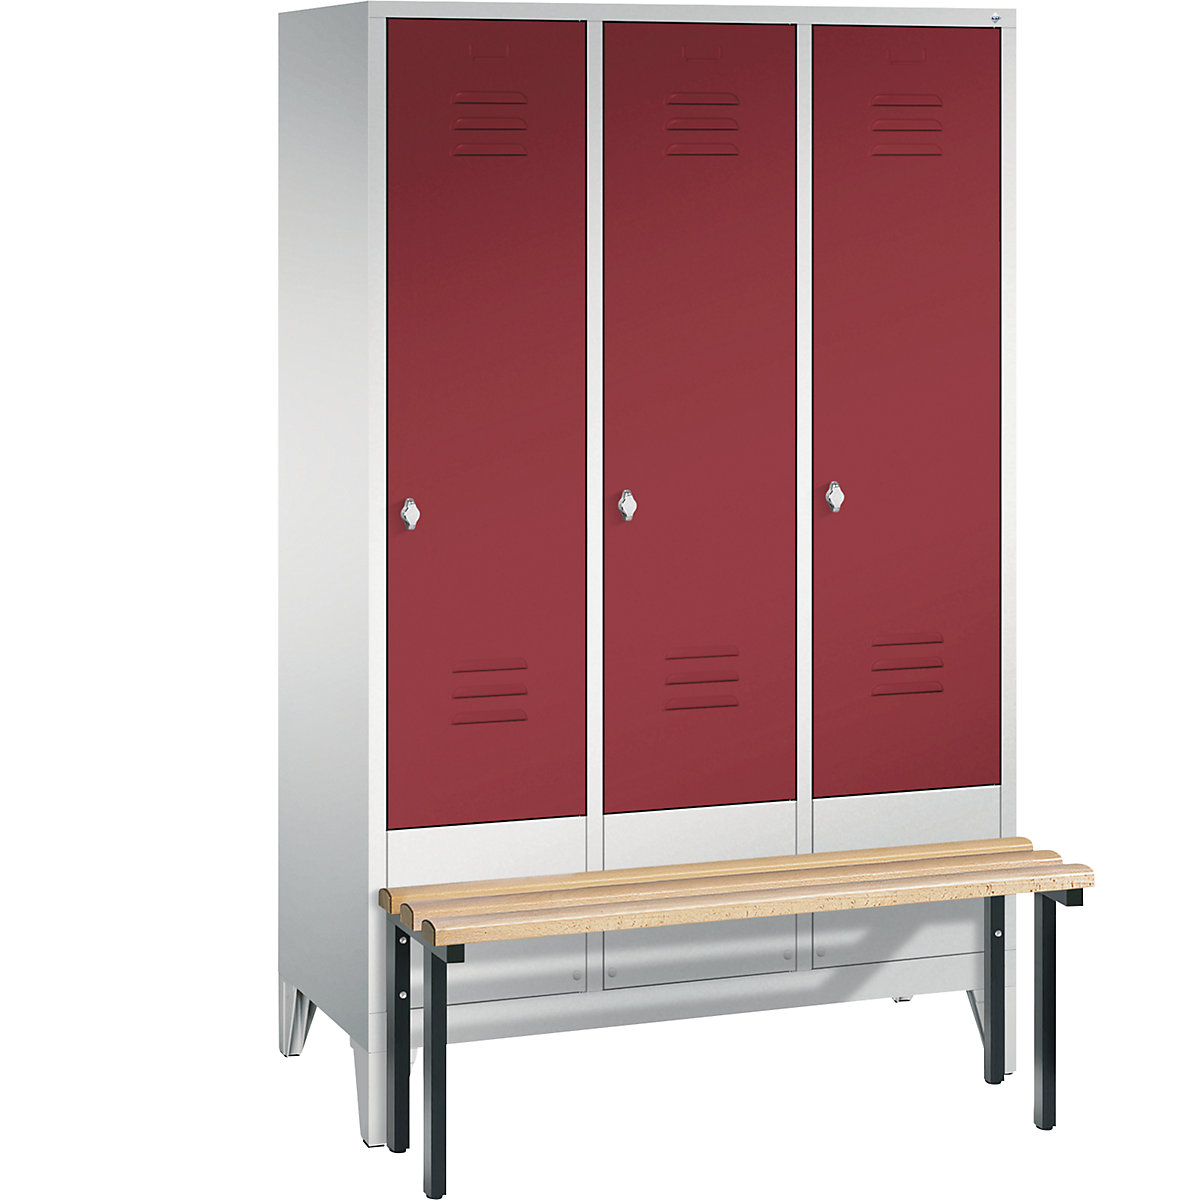 CLASSIC cloakroom locker with bench mounted in front – C+P, 3 compartments, compartment width 400 mm, light grey / ruby red-12